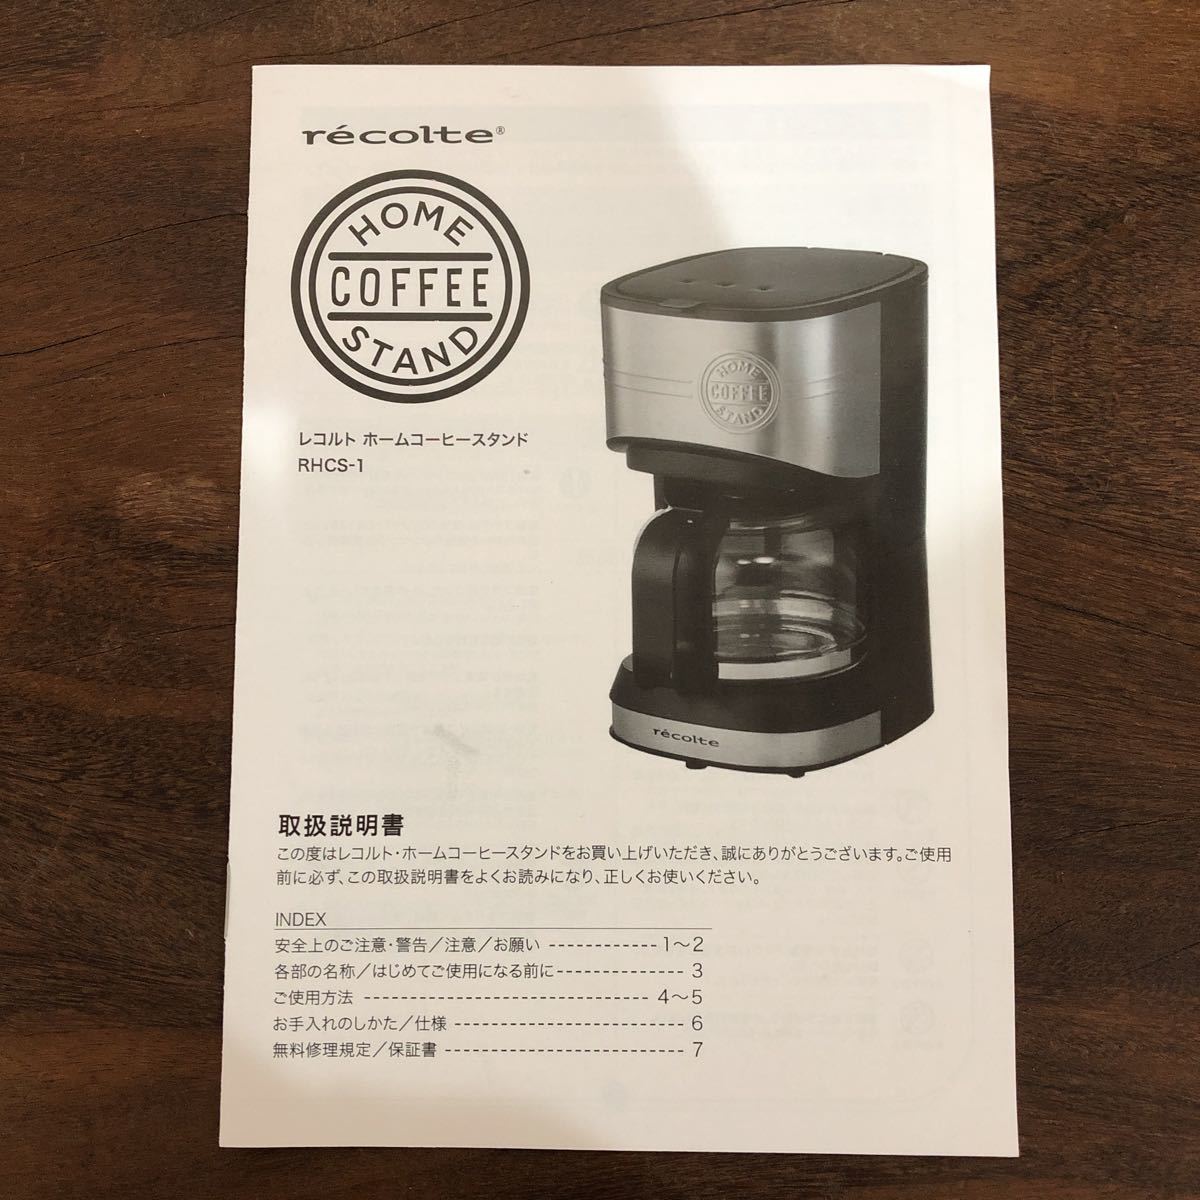 M-29 recoltere Colt Home coffee stand coffee maker coffee